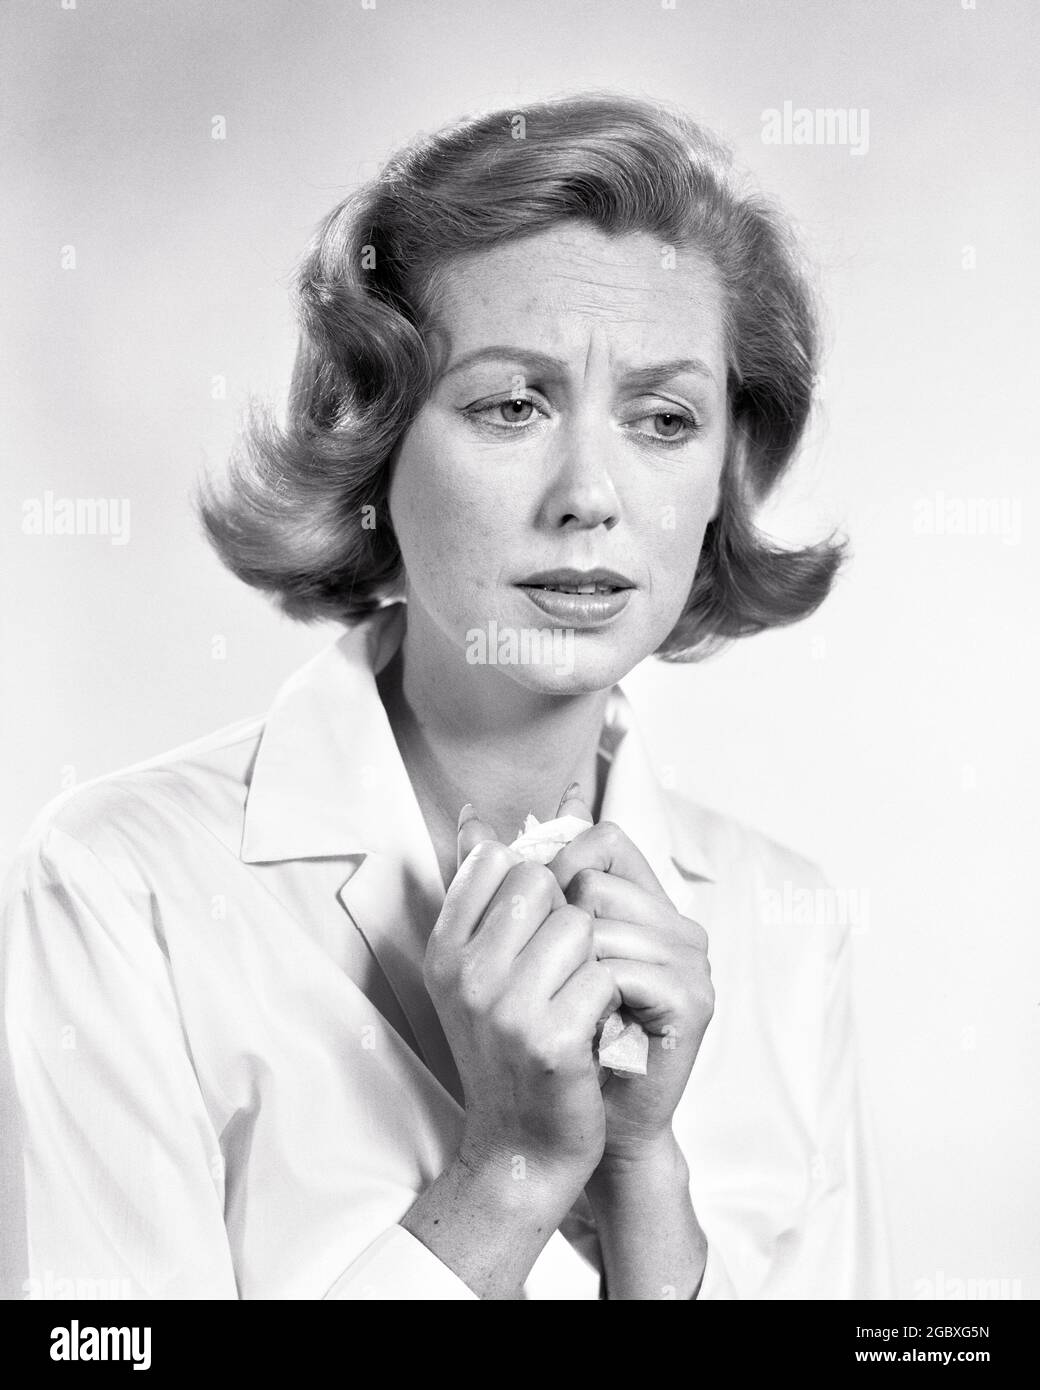 1950s 1960s PORTRAIT CONCERNED WORRIED WOMAN CLUTCHING TISSUE  - g4578 HAR001 HARS HALF-LENGTH LADIES PERSONS CARING CRY HEADACHE EXPRESSIONS TROUBLED B&W CONCERNED SADNESS HEALTHCARE ANXIETY PREVENTION ALLERGY TISSUE HEALING DIAGNOSIS HEALTH CARE IMPAIRMENT MOOD SORROW TREATMENT MOURNING ALLERGIES CONCEPTUAL GLUM REGRET GRIEF MID-ADULT MID-ADULT WOMAN MISERABLE SINUS BLACK AND WHITE CAUCASIAN ETHNICITY CLUTCHING DISEASE DOWNCAST HAR001 OLD FASHIONED Stock Photo